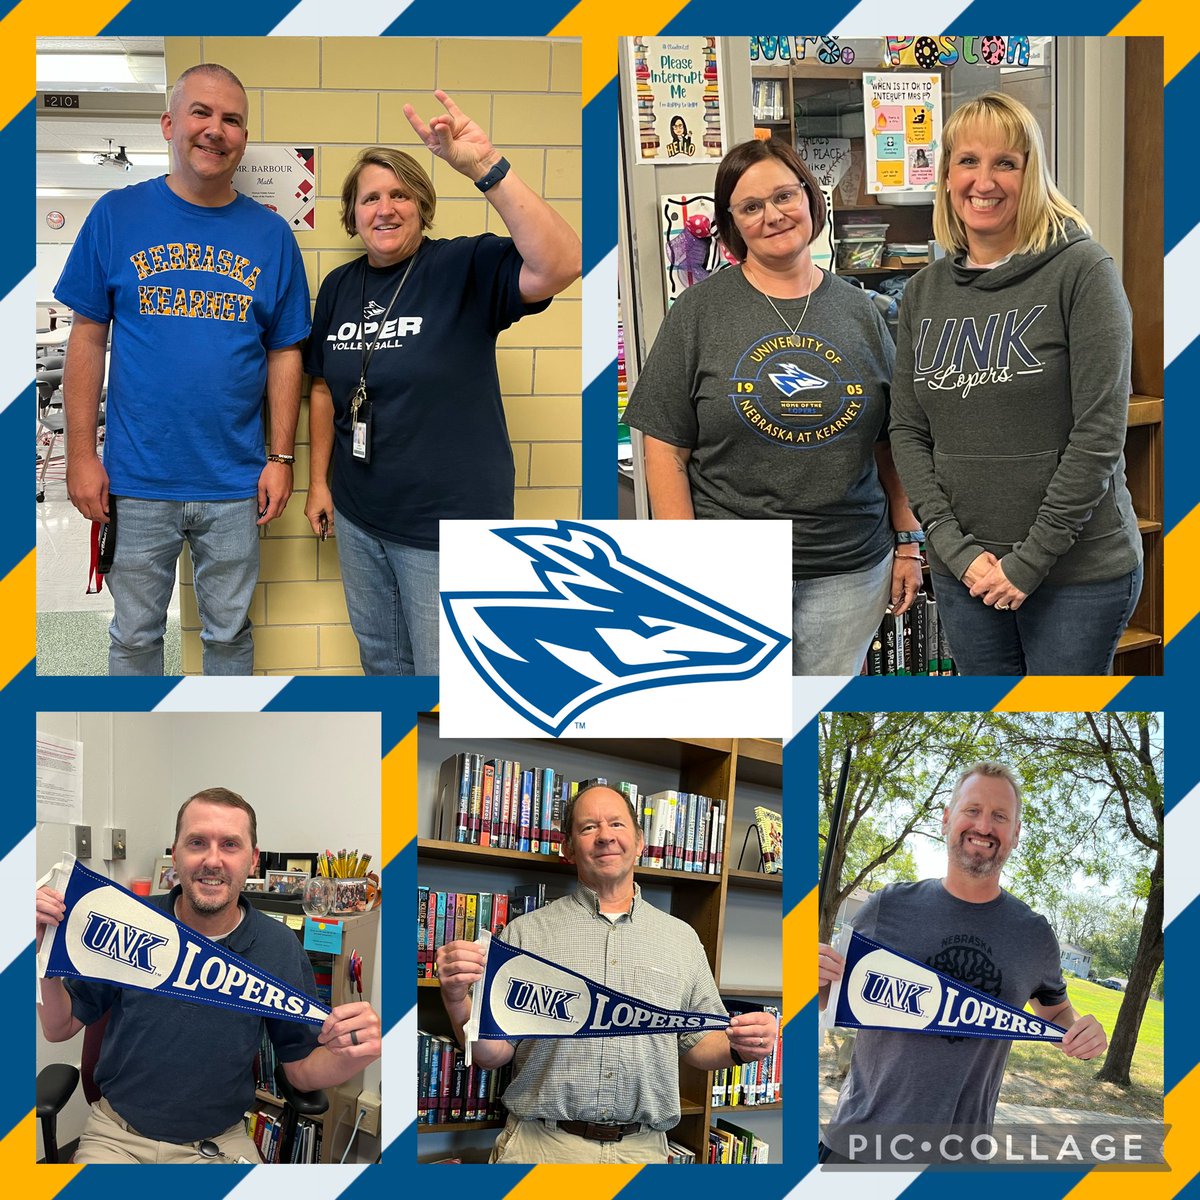 Look at all these years of experience supporting their Alma Mater @UNKearney & Kearney State on #CollegeColorsDay  There are over 170 years of educational excellence represented in this photo! From '88-'08  #GoLopers #BeBlueGoldBold #OPSProud